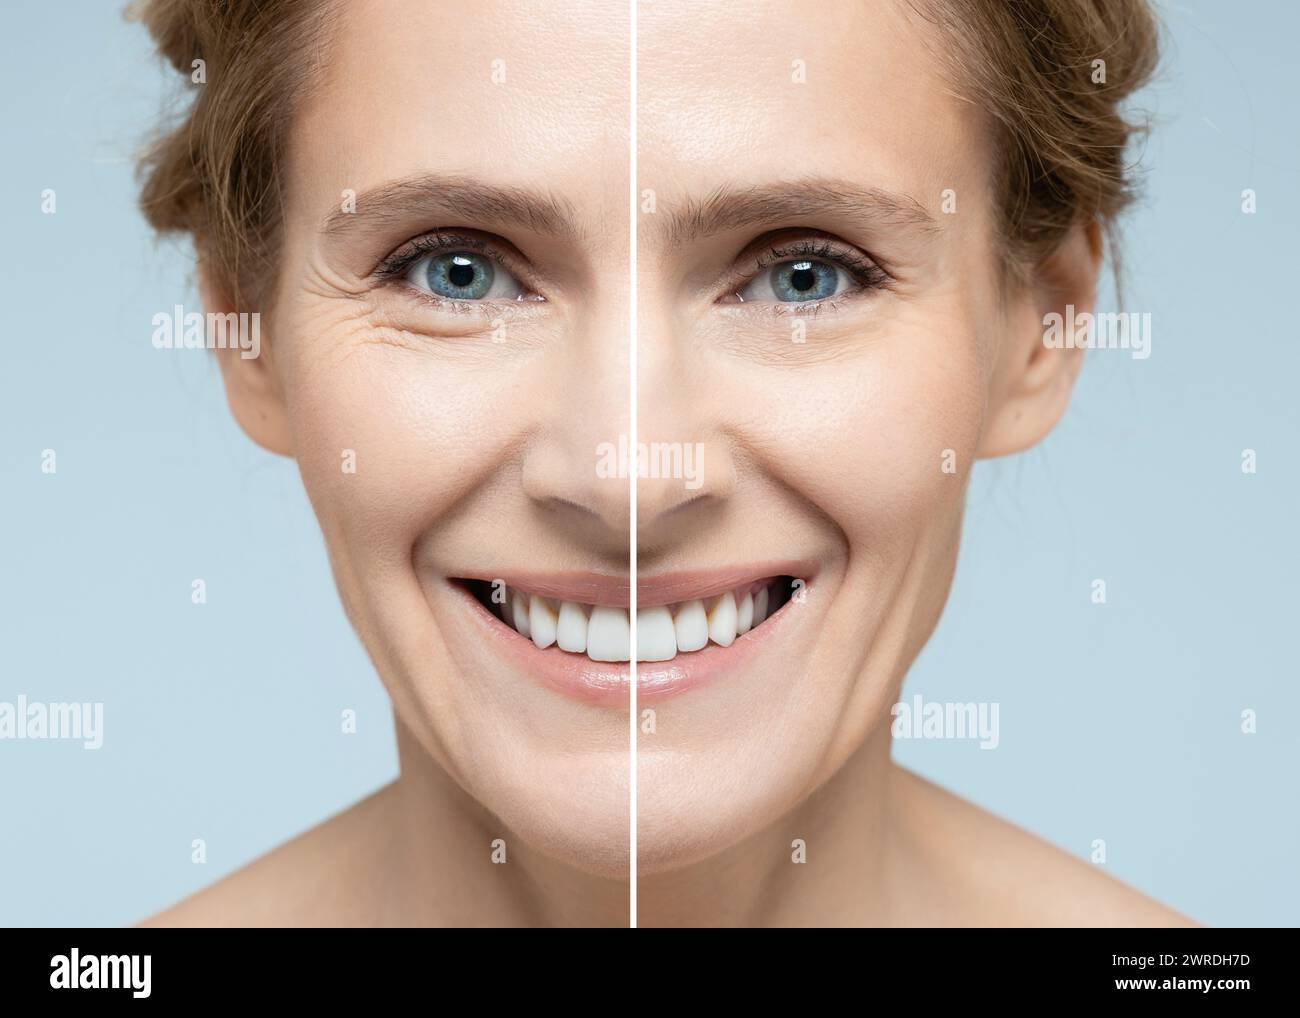 Woman's face before and after skin tightening and anti-aging procedures. Remove of wrinkles, nasolabial folds, skin rejuvenation procedure Stock Photo